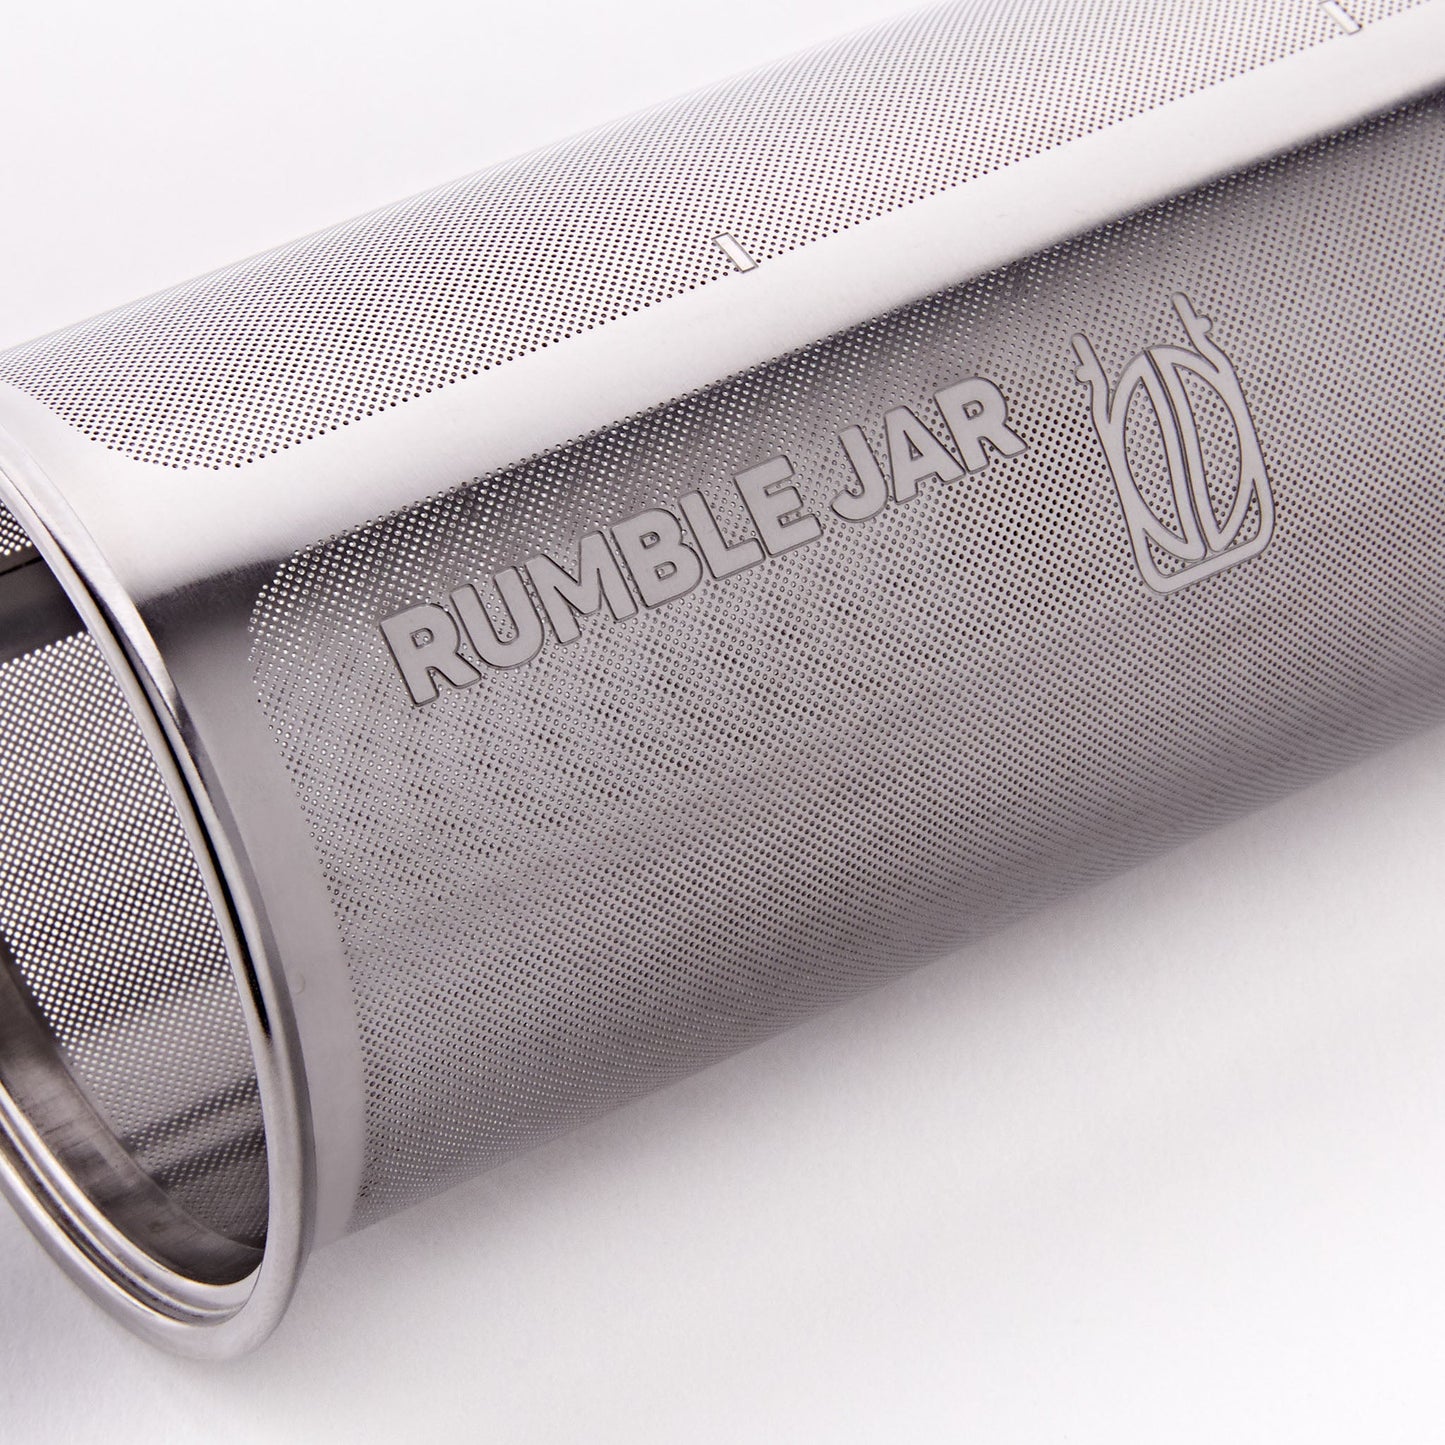 Rumble Jar features a sturdy etched filter design